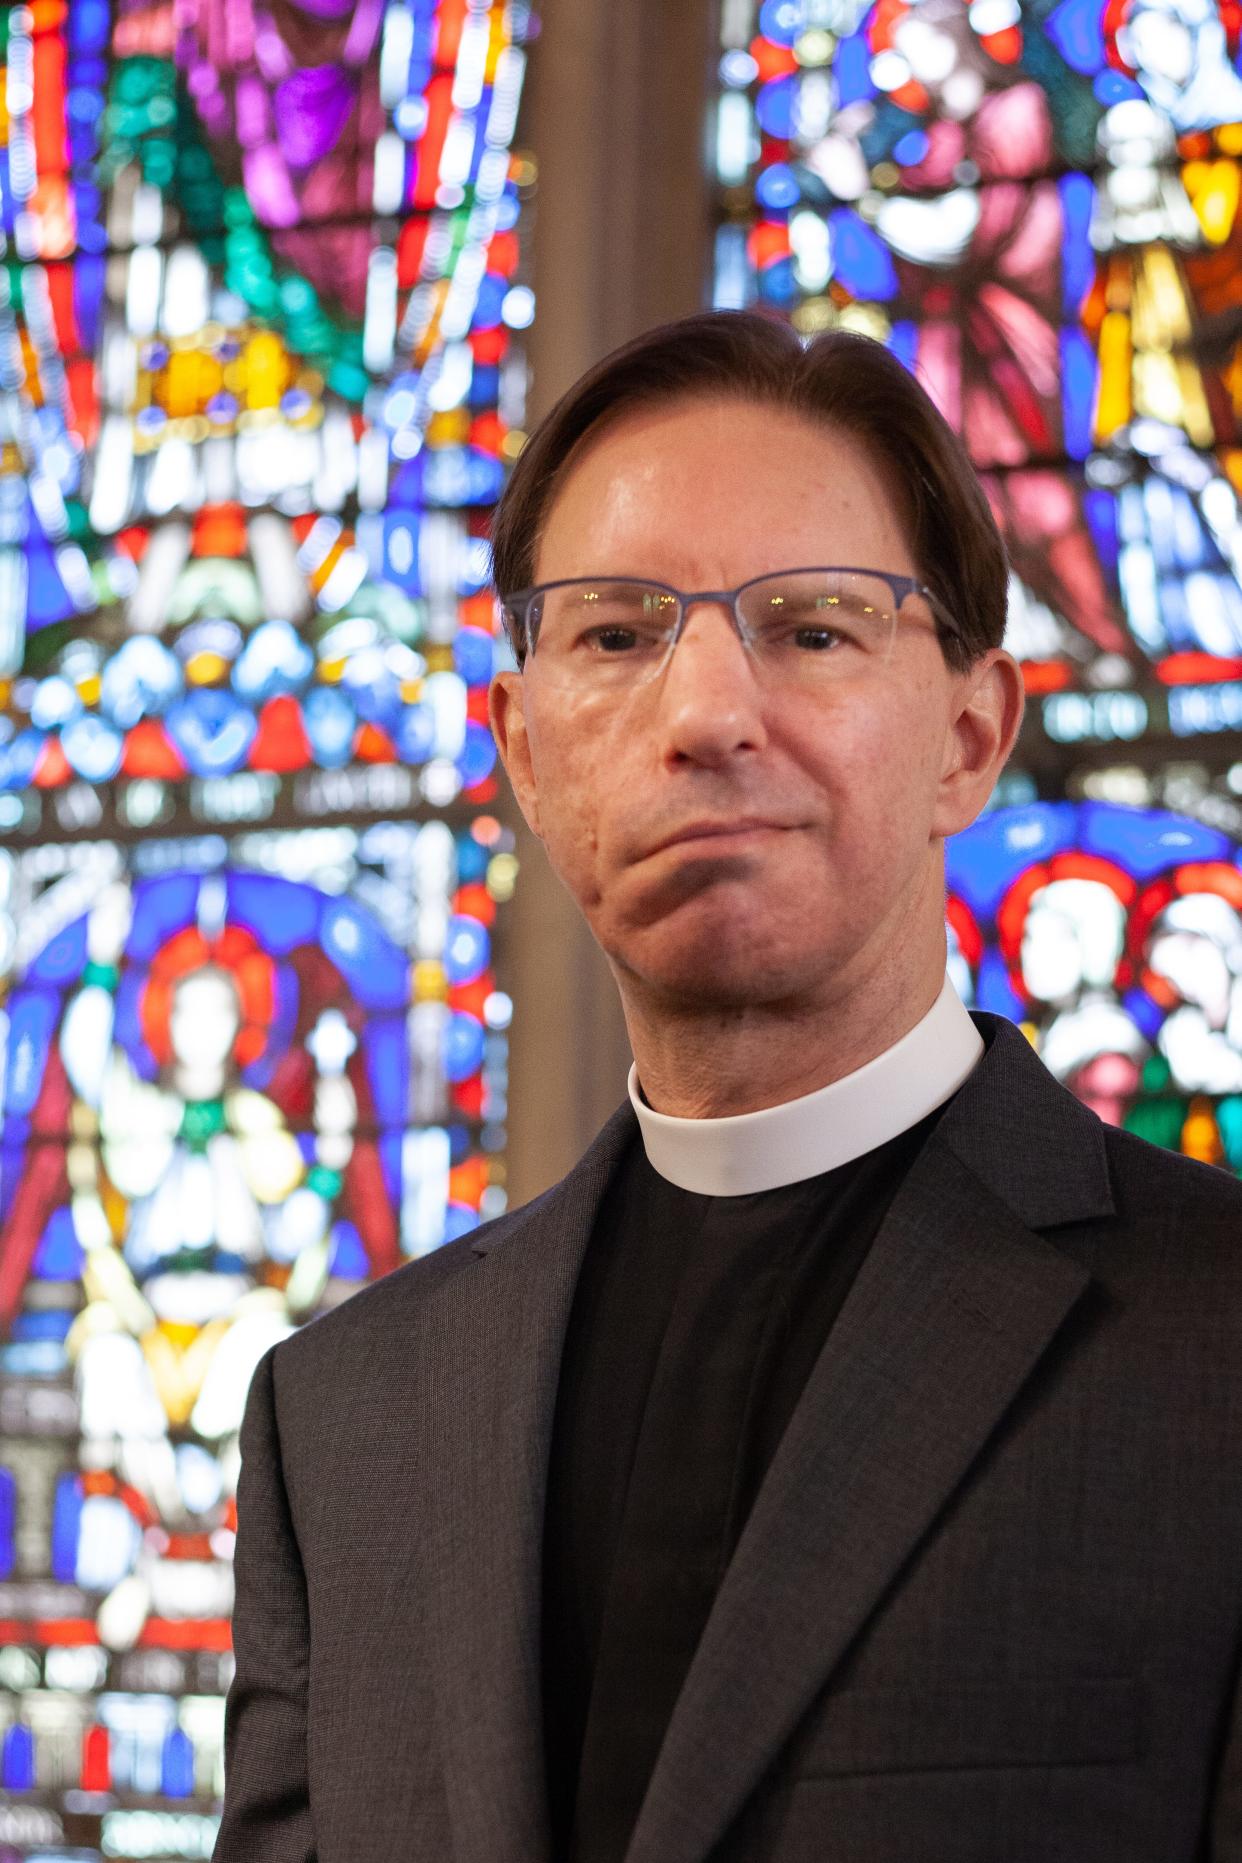 Rev. Tim Schenck is the new rector of The Church of Bethesda-by-the-Sea